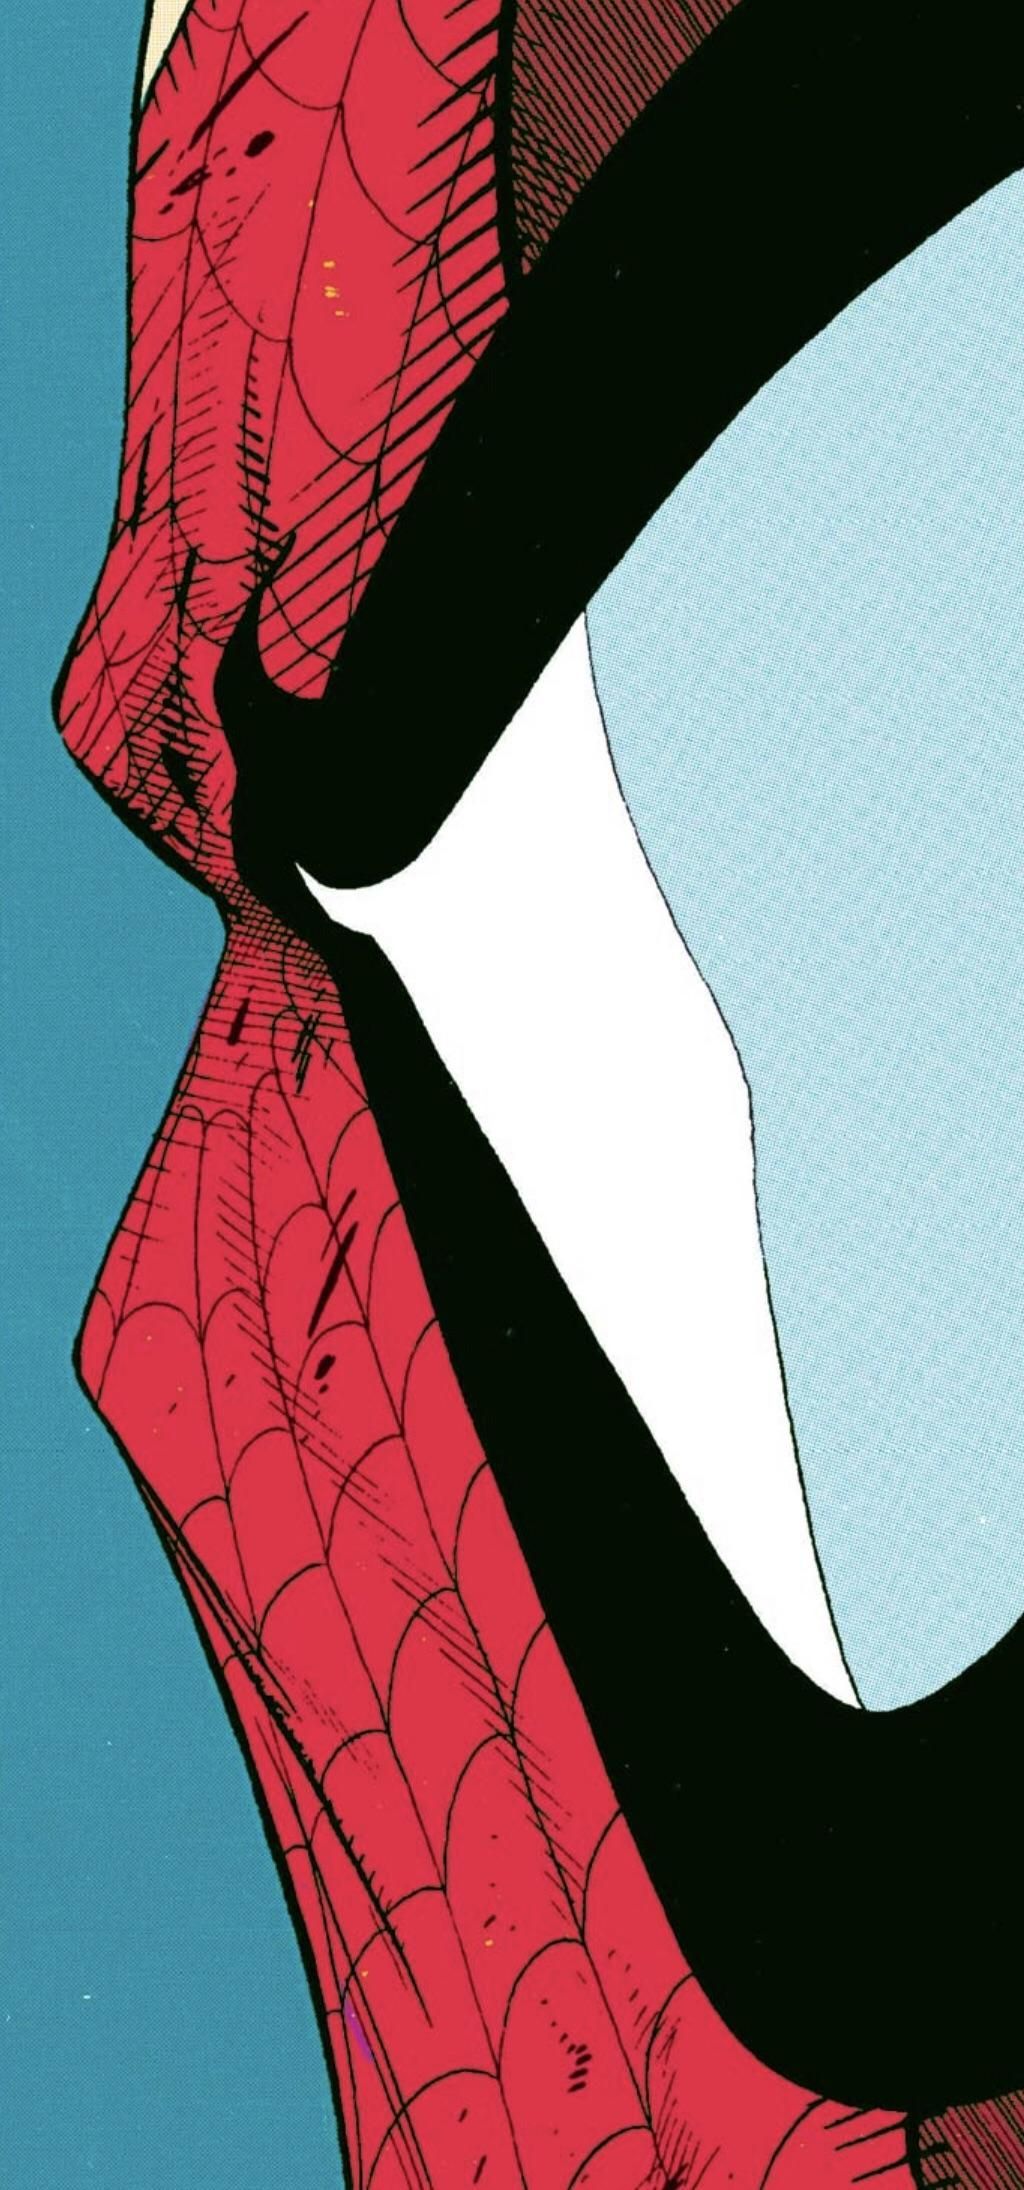 Made This IPhone X Wall Paper From Spider Man By Todd McFarlane. Spiderman Comic, Spider Man Art Artworks, Spiderman Art